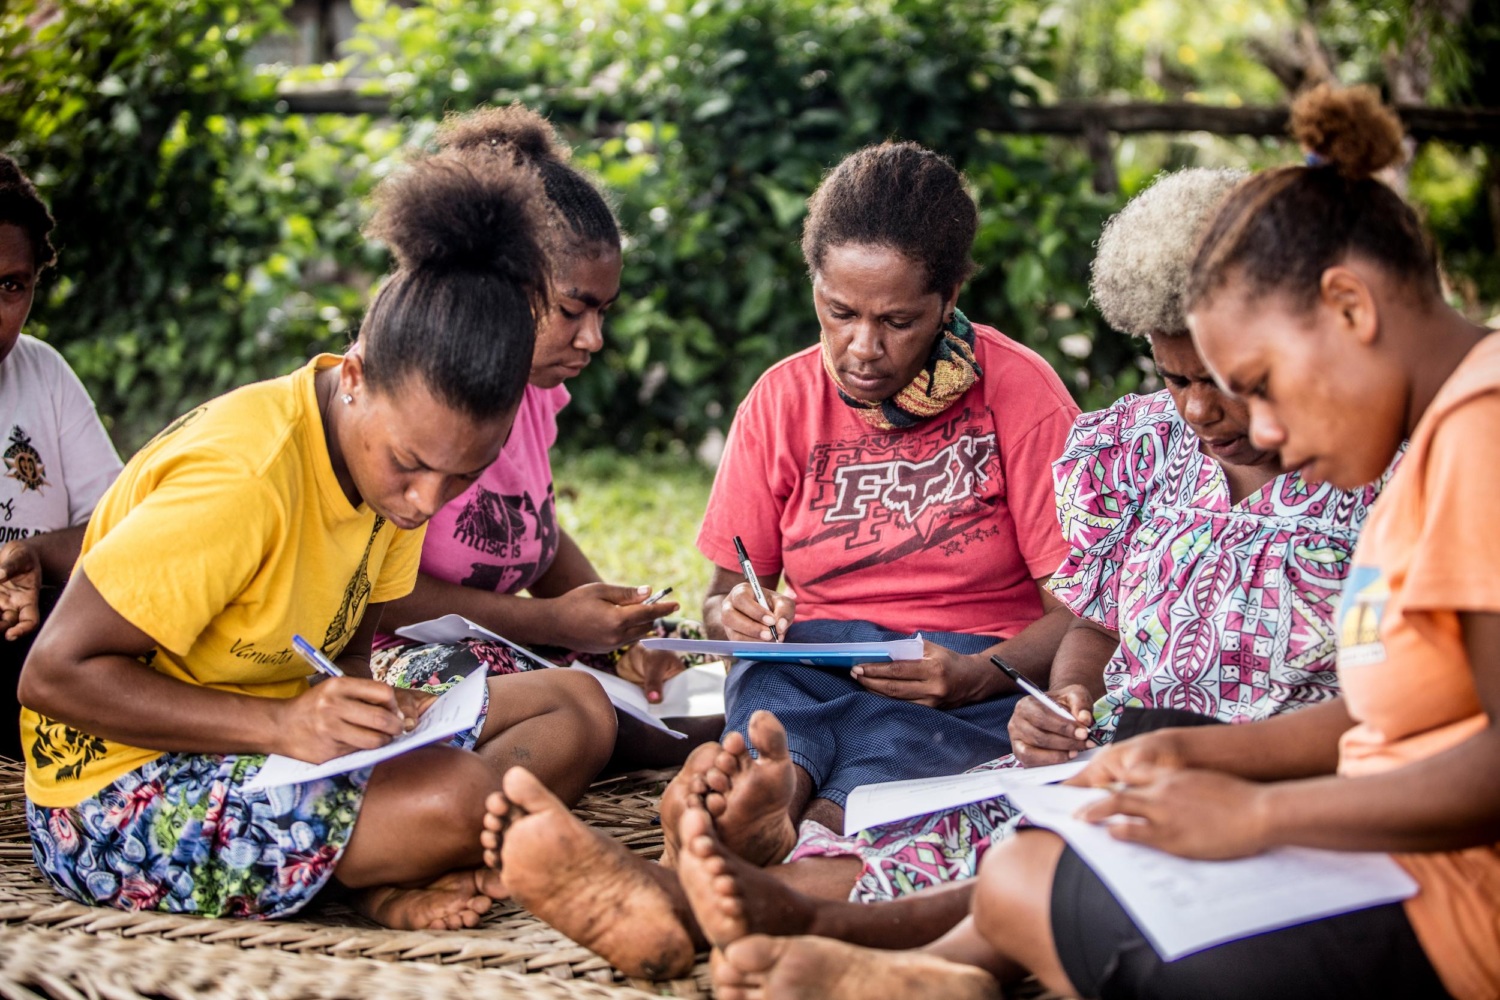 A group of women inn Erromango, Vanuatu sitting on the ground learning about strategies for disaster survival.